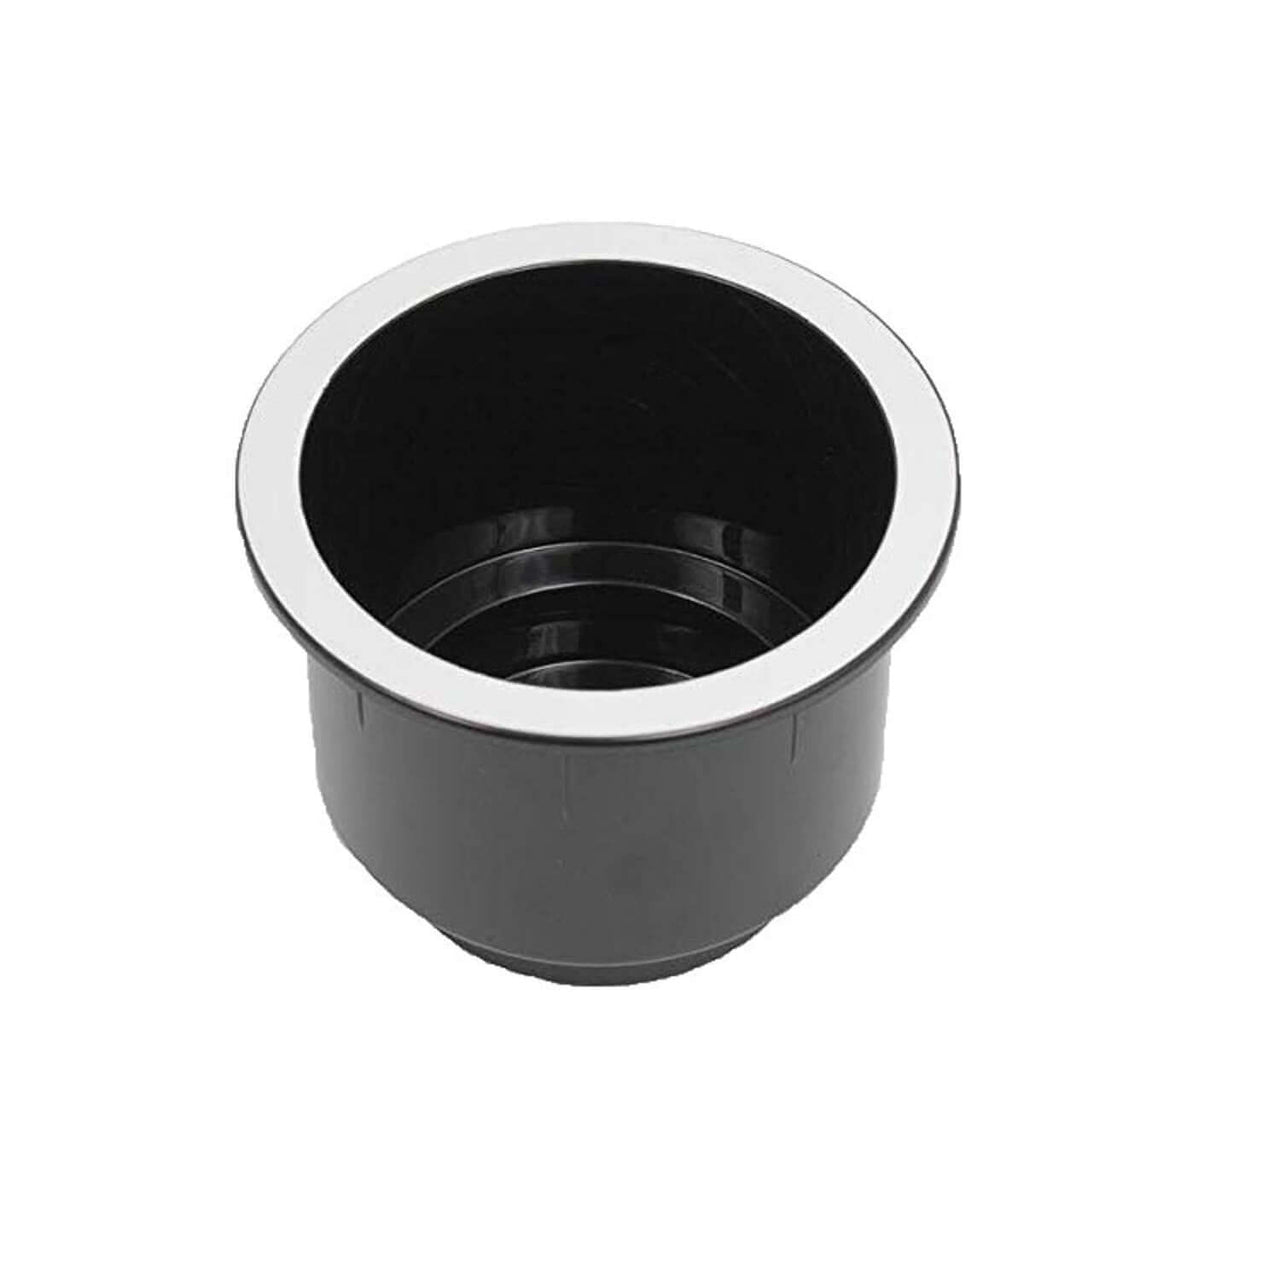 Replacement Black Plastic Cup Holders, Chrome or Wood Finished Lip, Set of 2